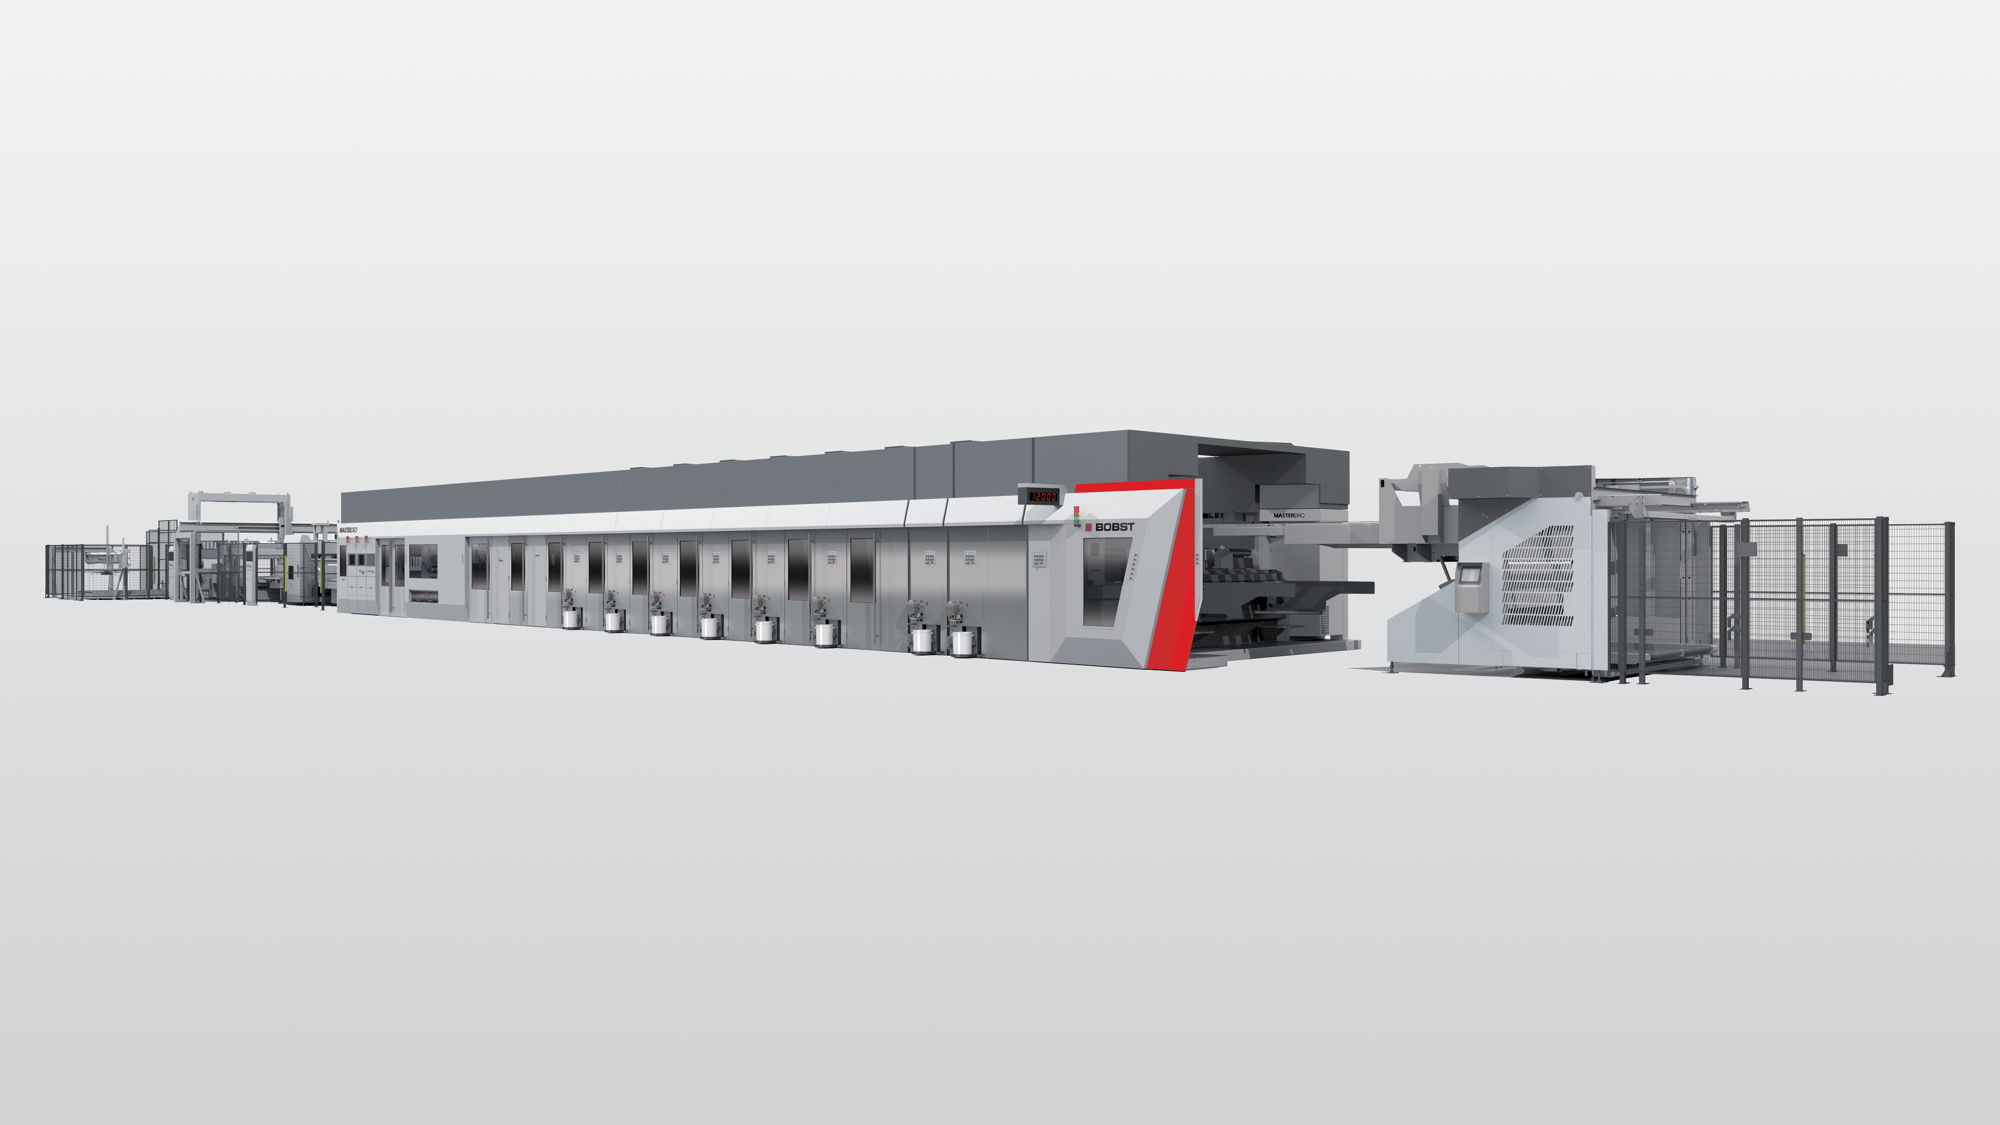 With its uniquely high productivity and production quality, the intuitively operated MASTERLINE DRO is the new flagship of the BOBST machines in the flexo printing and rotary die cutting product line for high-quality internal and external printing in a single pass.